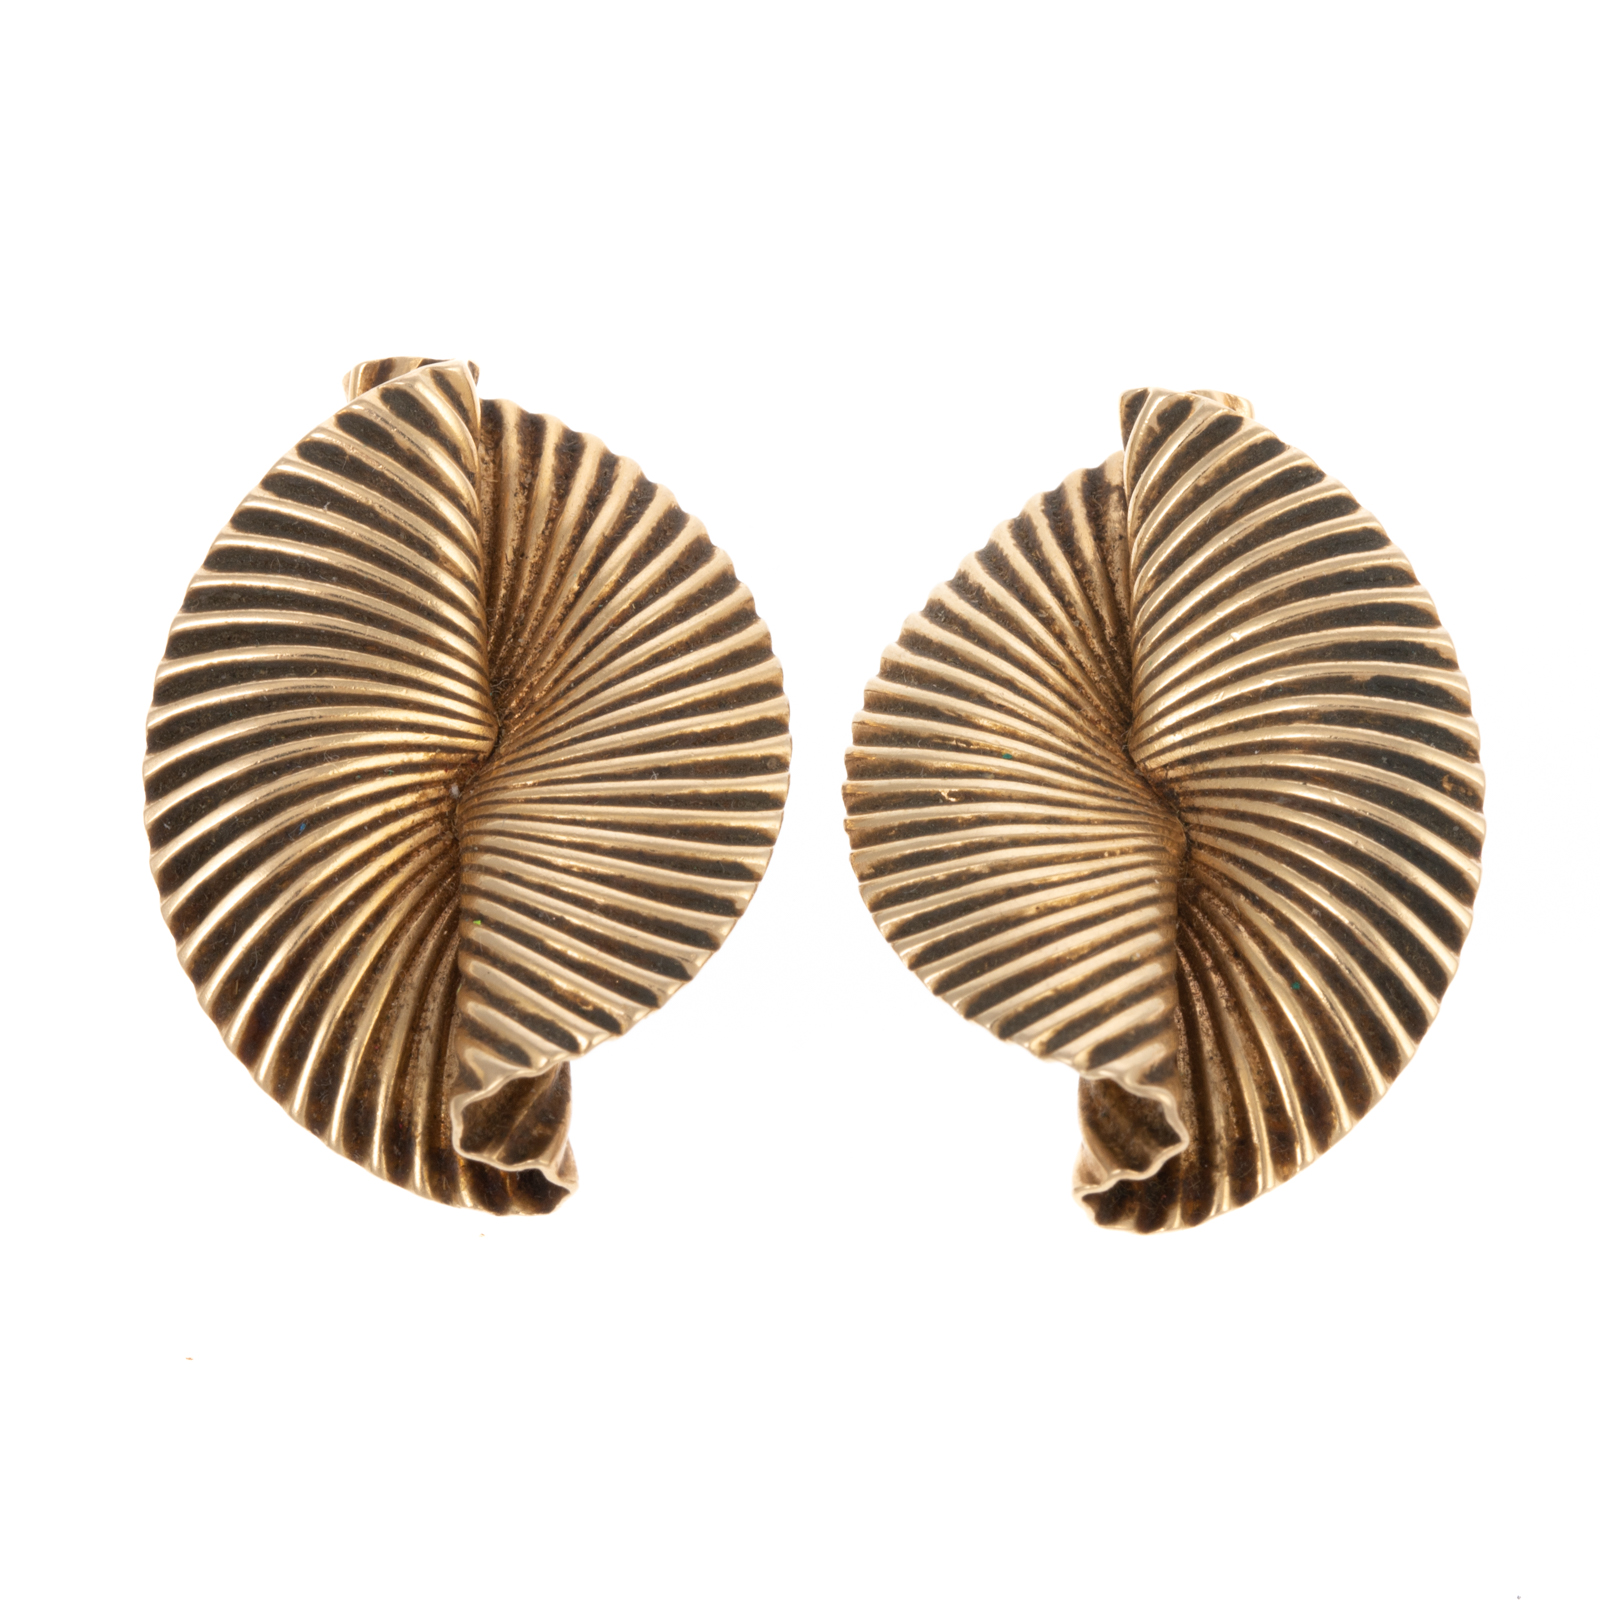 A PAIR OF MID-CENTURY RIBBED EARRINGS